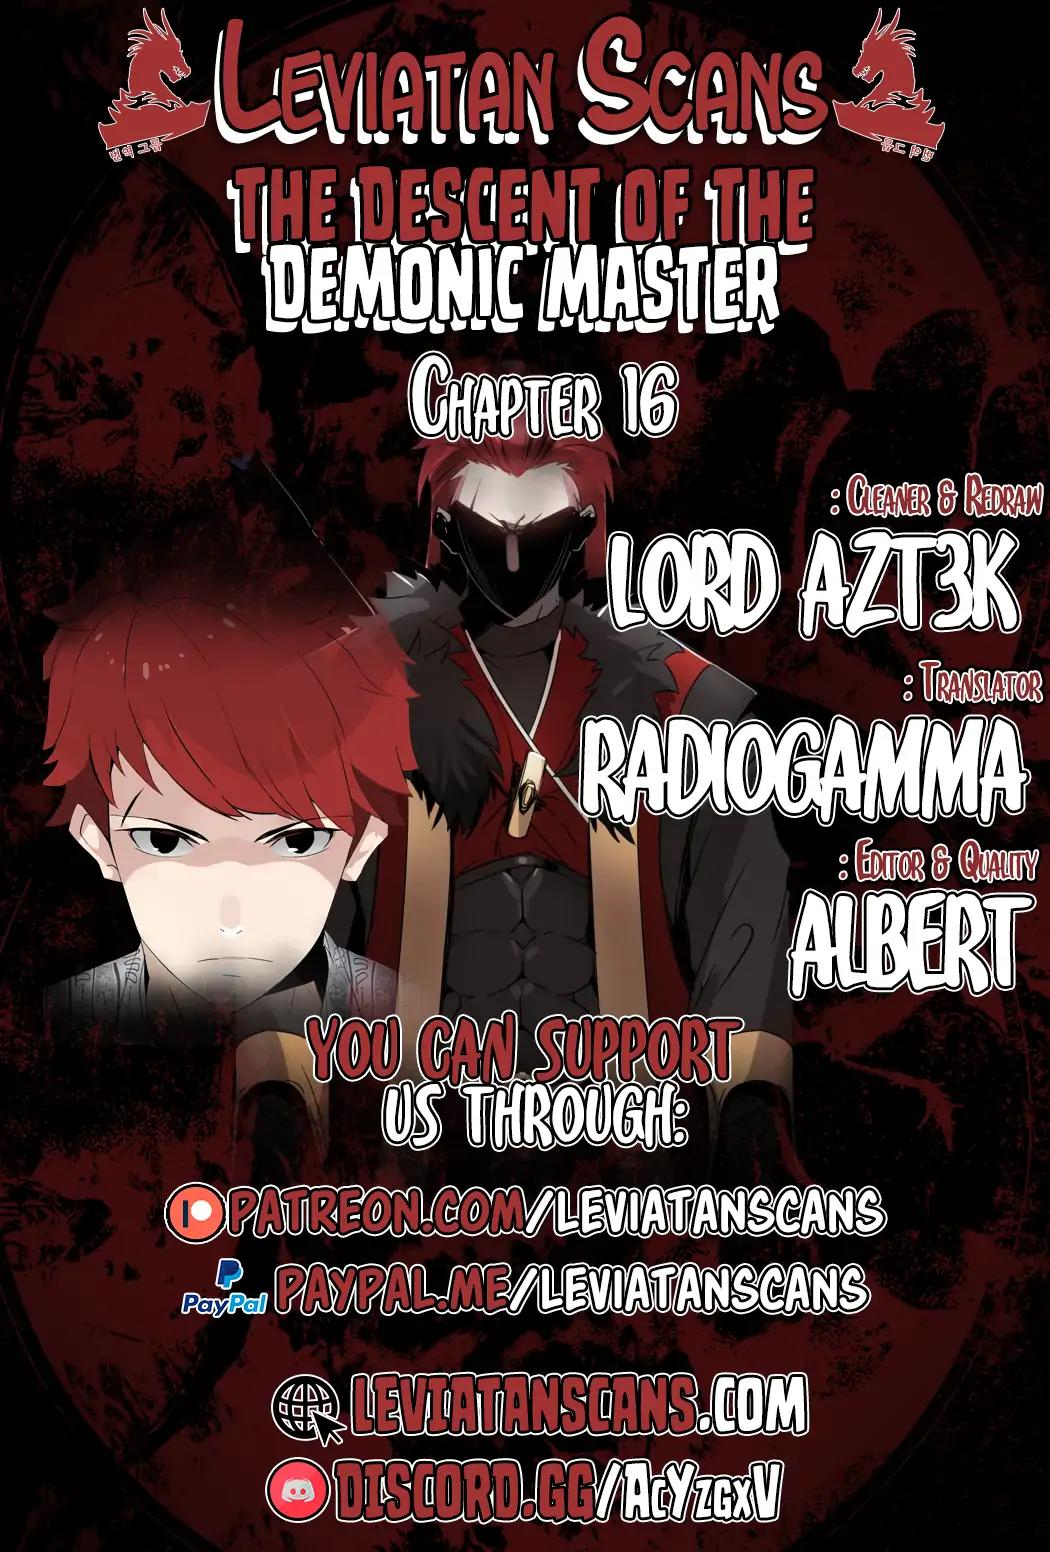 The Descent of the Demonic Master Chapter 16